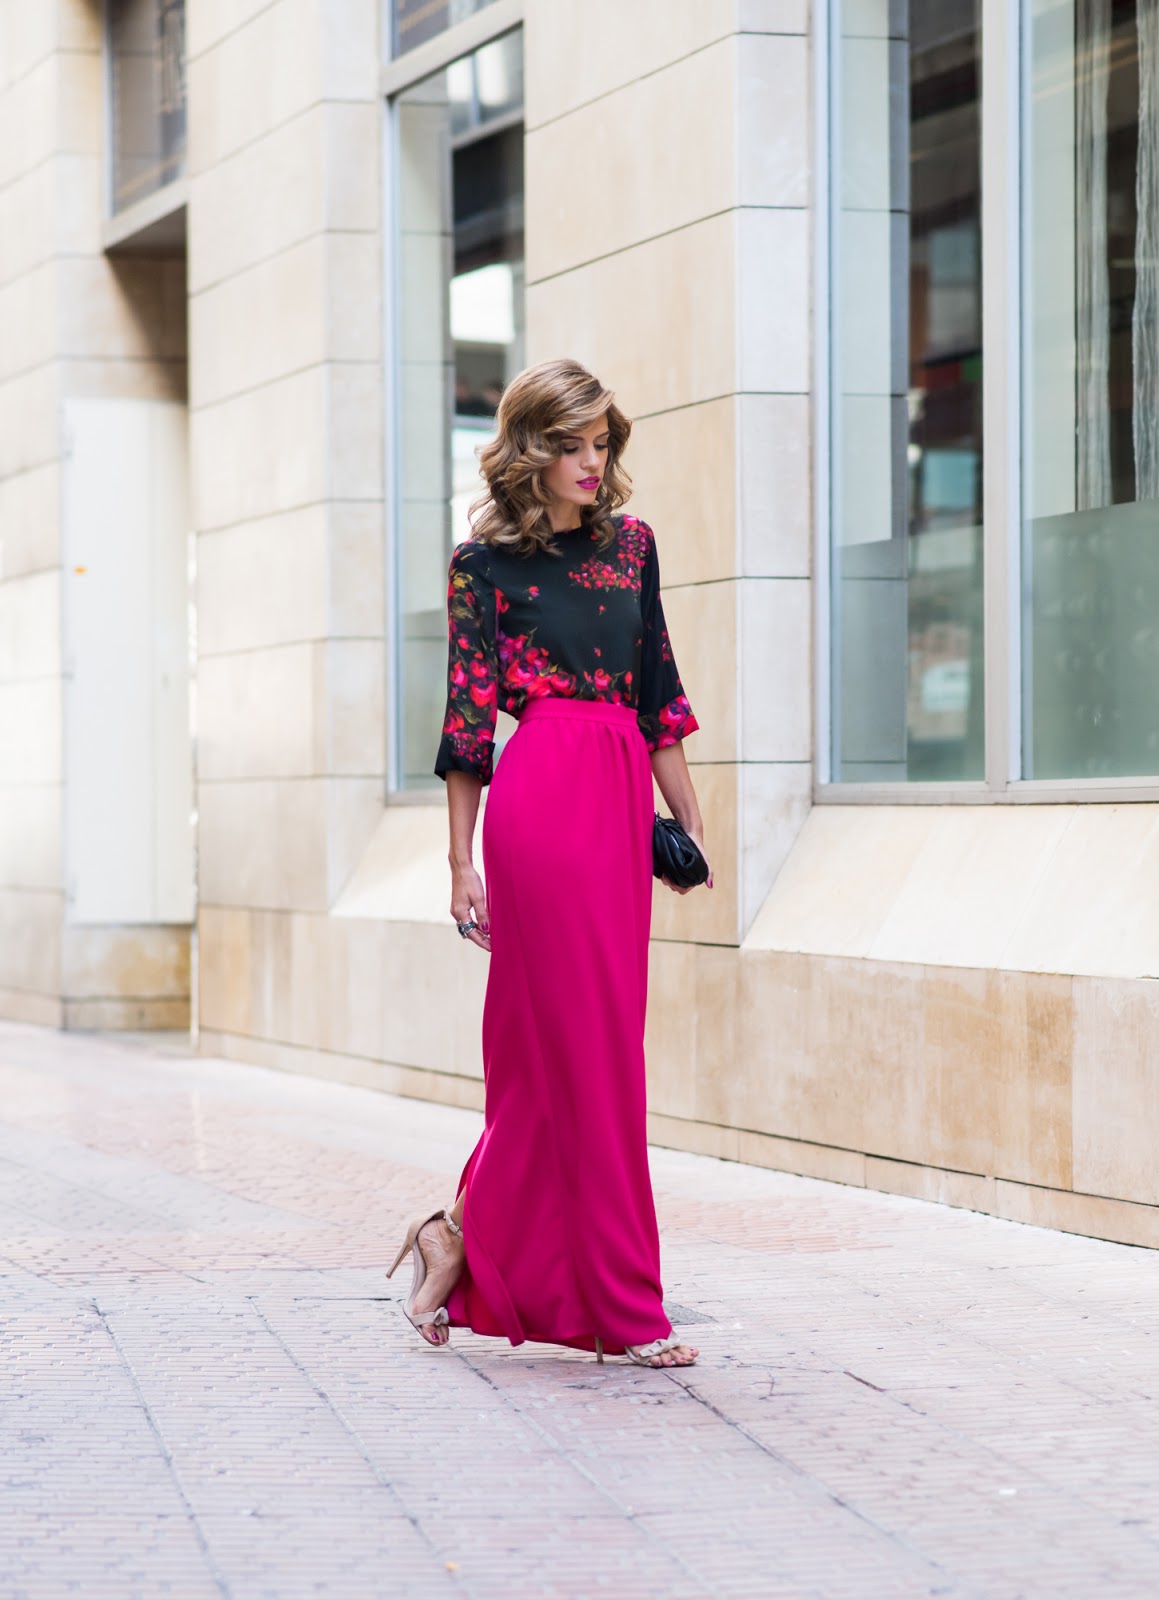 10 Lovely Outfits for Your Next Special Occasion